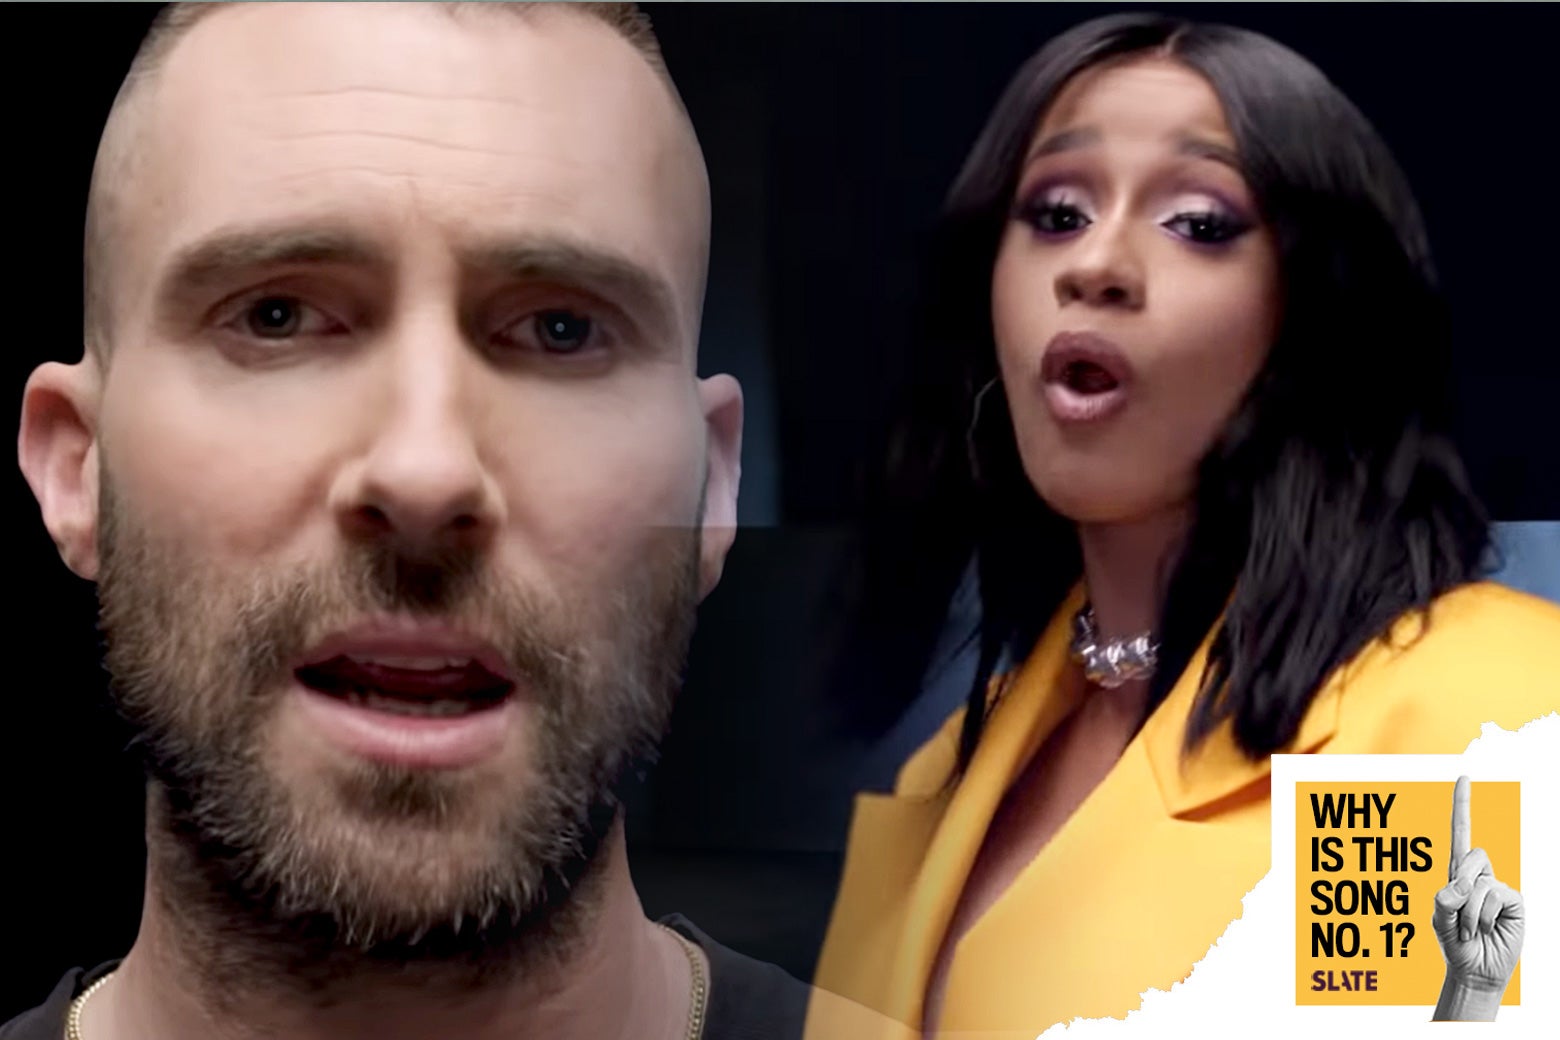 Adam Levine and Cardi B singing in the "Girls Like You" video.